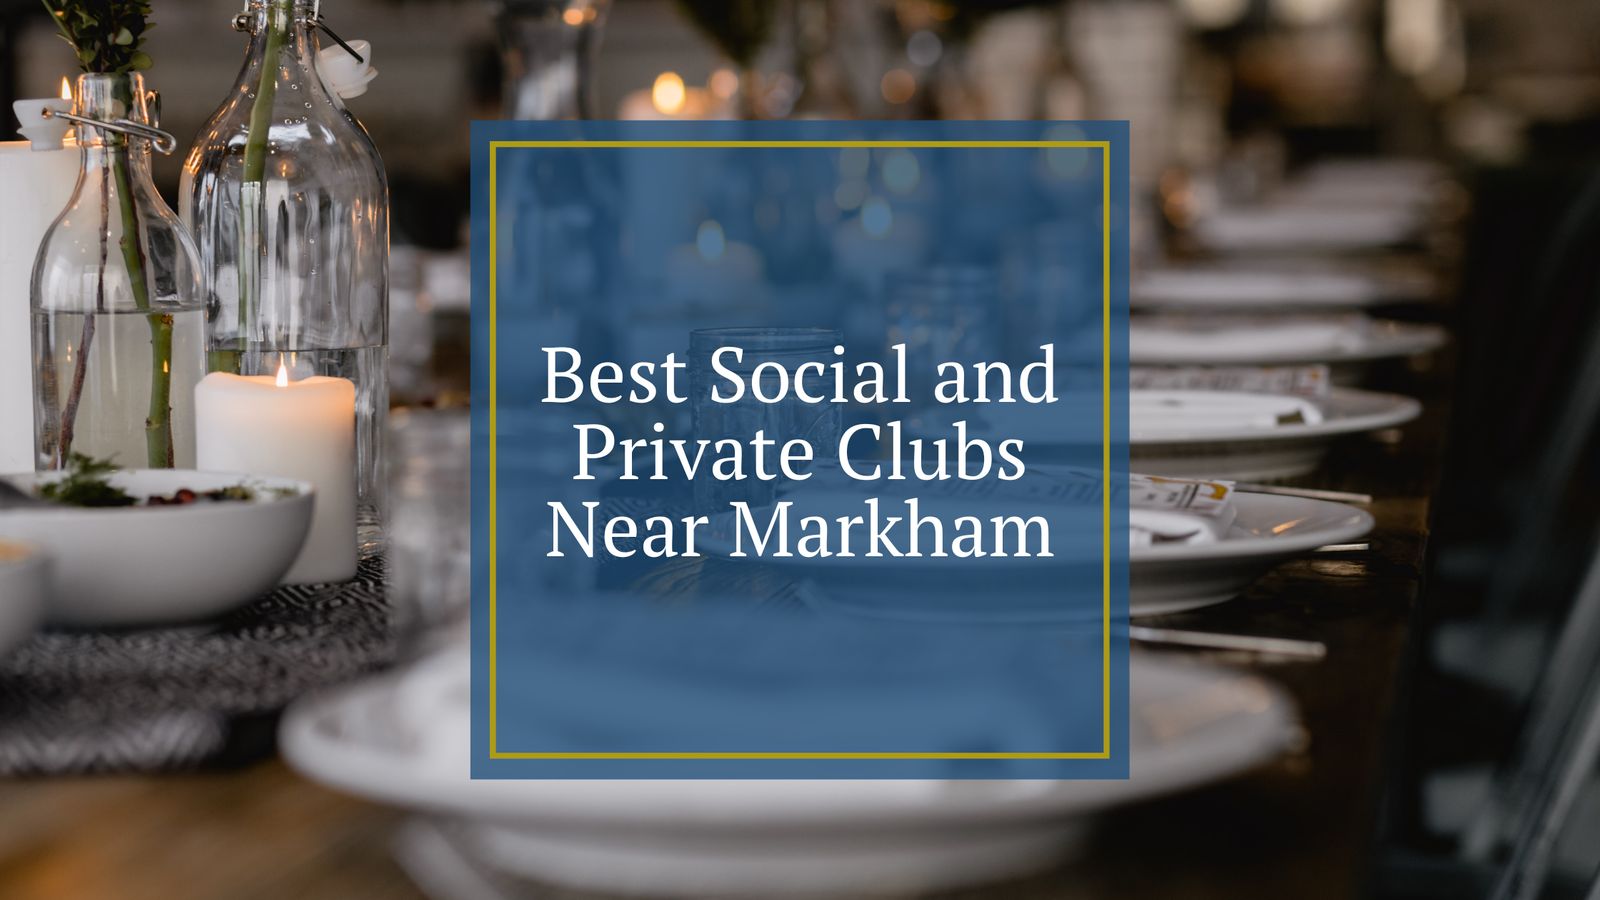 Best Social and Private Clubs Near Markham